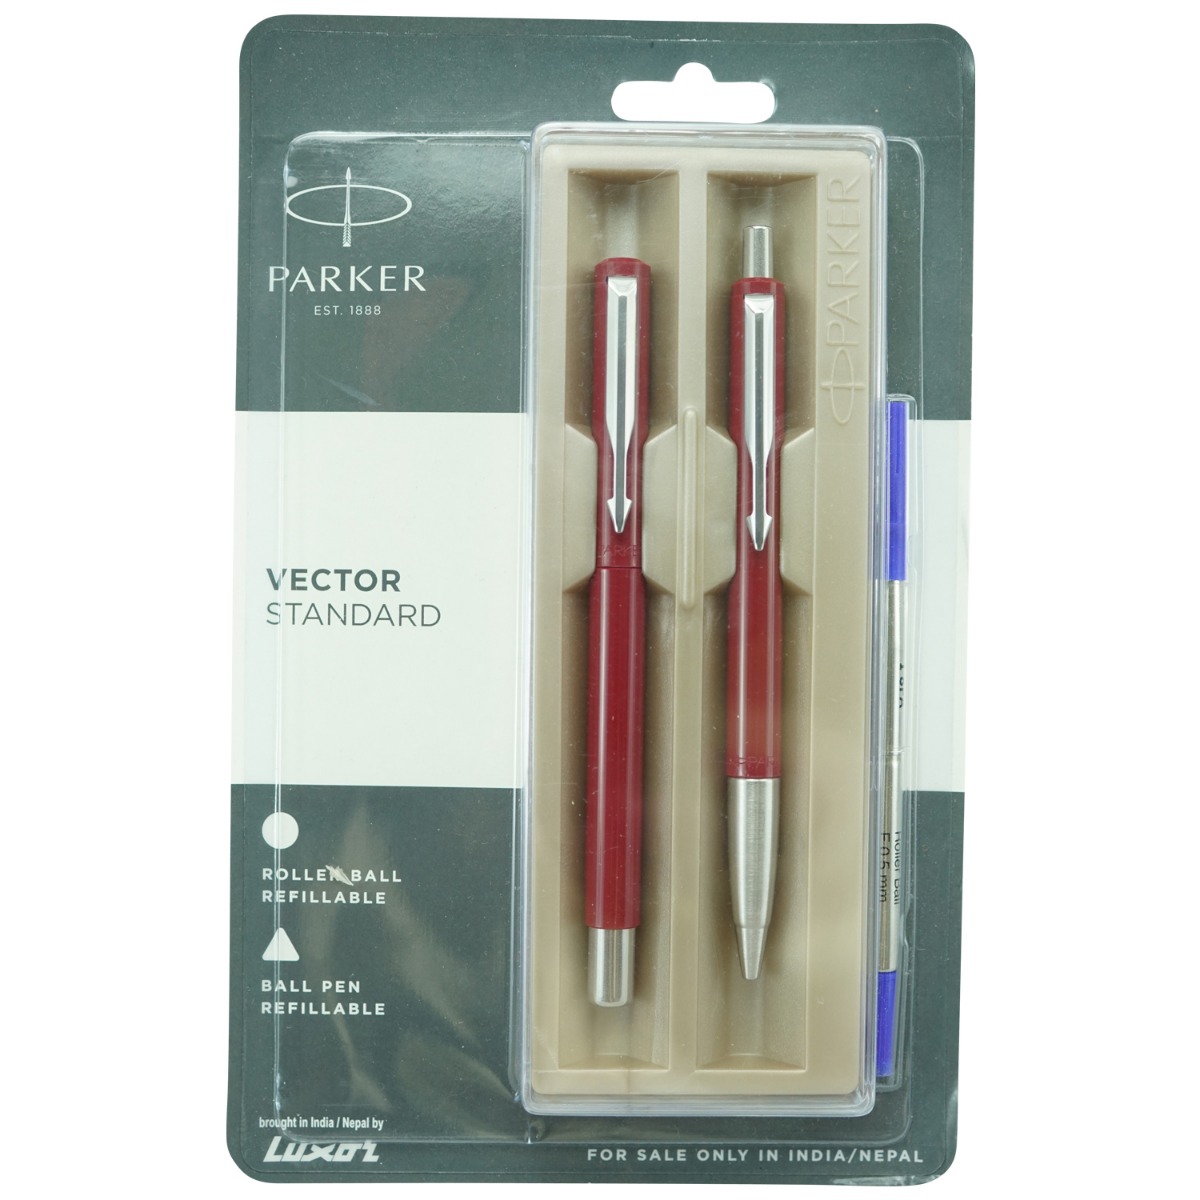 Parker Vector Standard Model:16090 Red Color Body with Silver Clip With Roller Ball Pen and Ball Pen Fine Tip Set